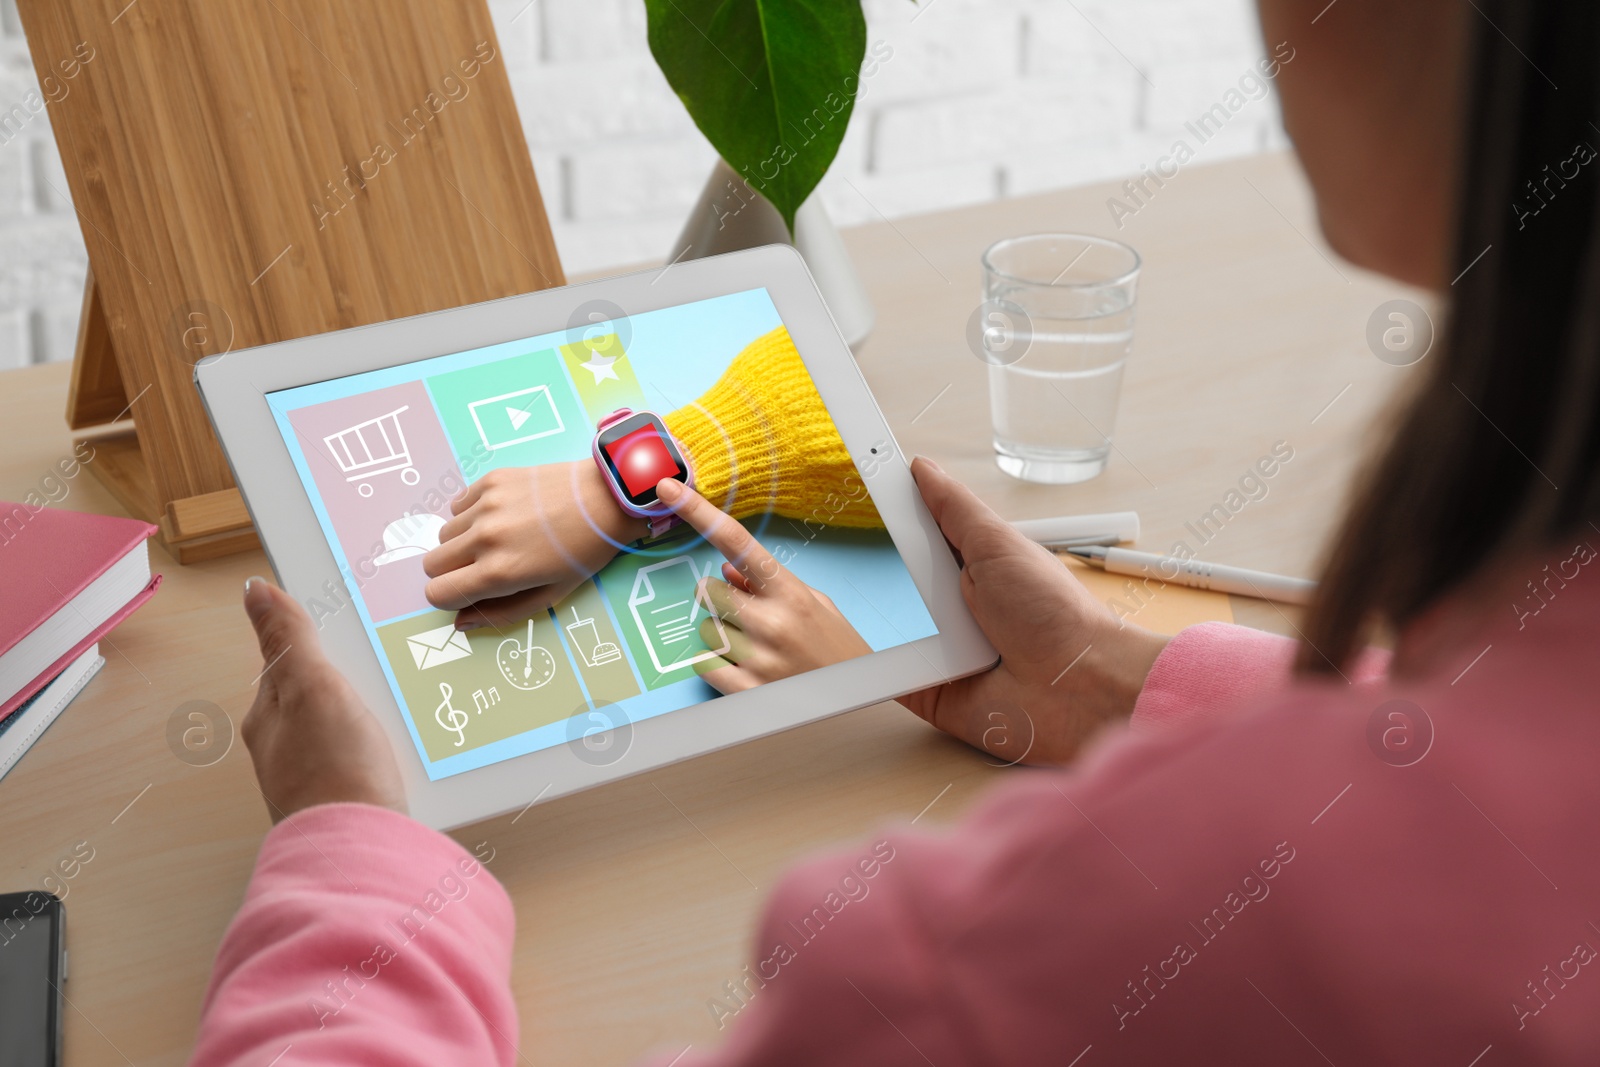 Image of Control kid's geolocation via smart watch. Woman using tablet at table, closeup